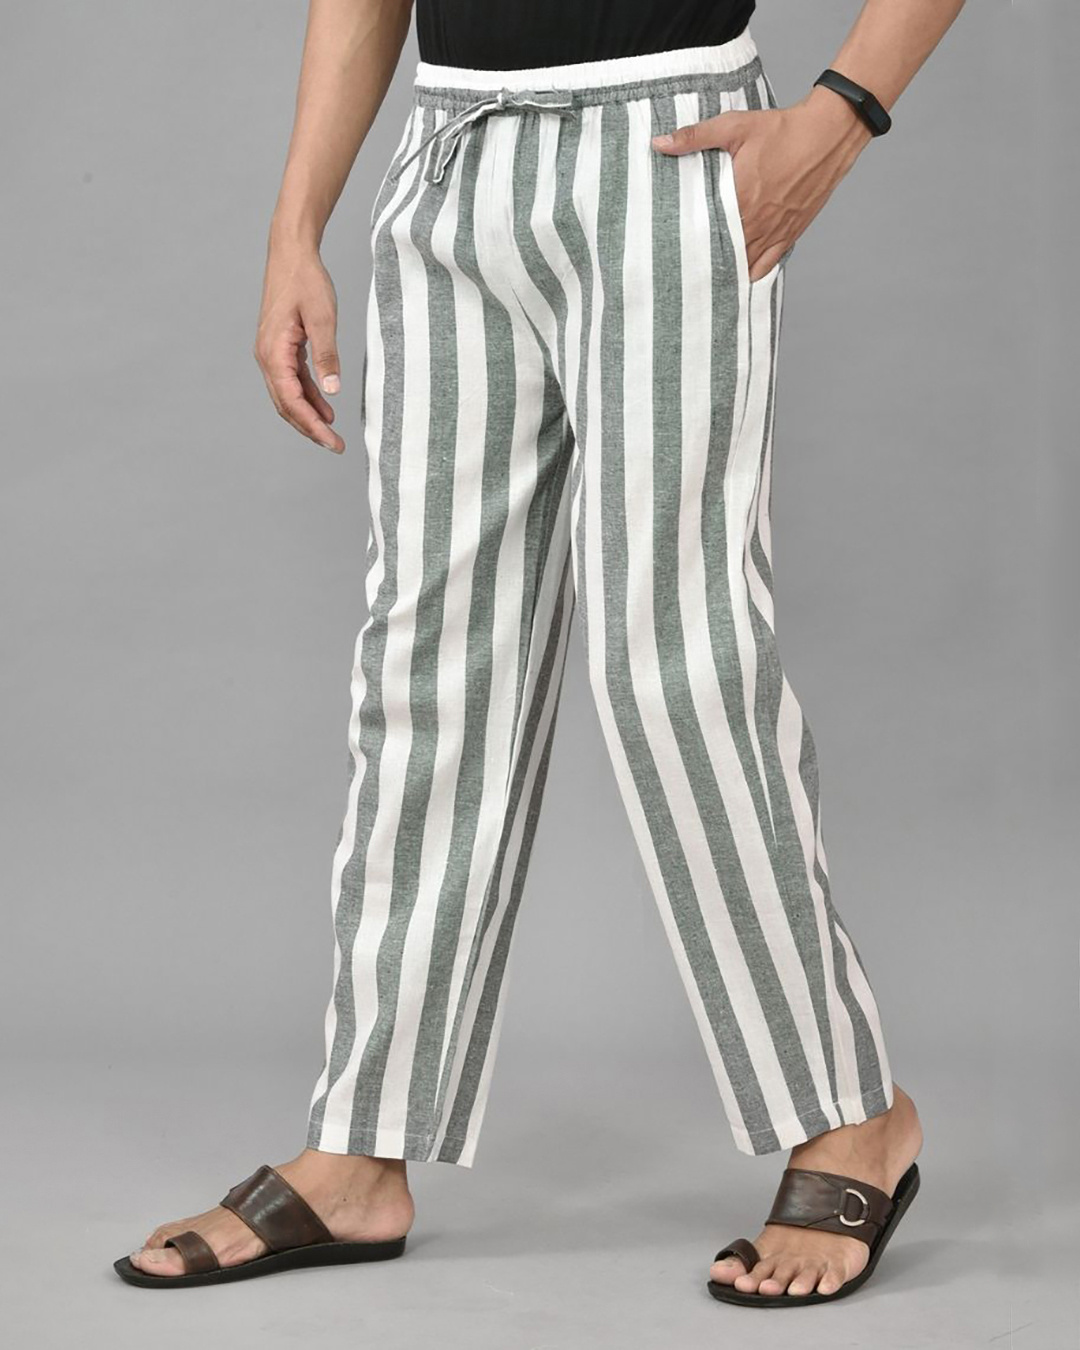 Buy Arrow Mid Rise Flat Front Striped Trousers - NNNOW.com